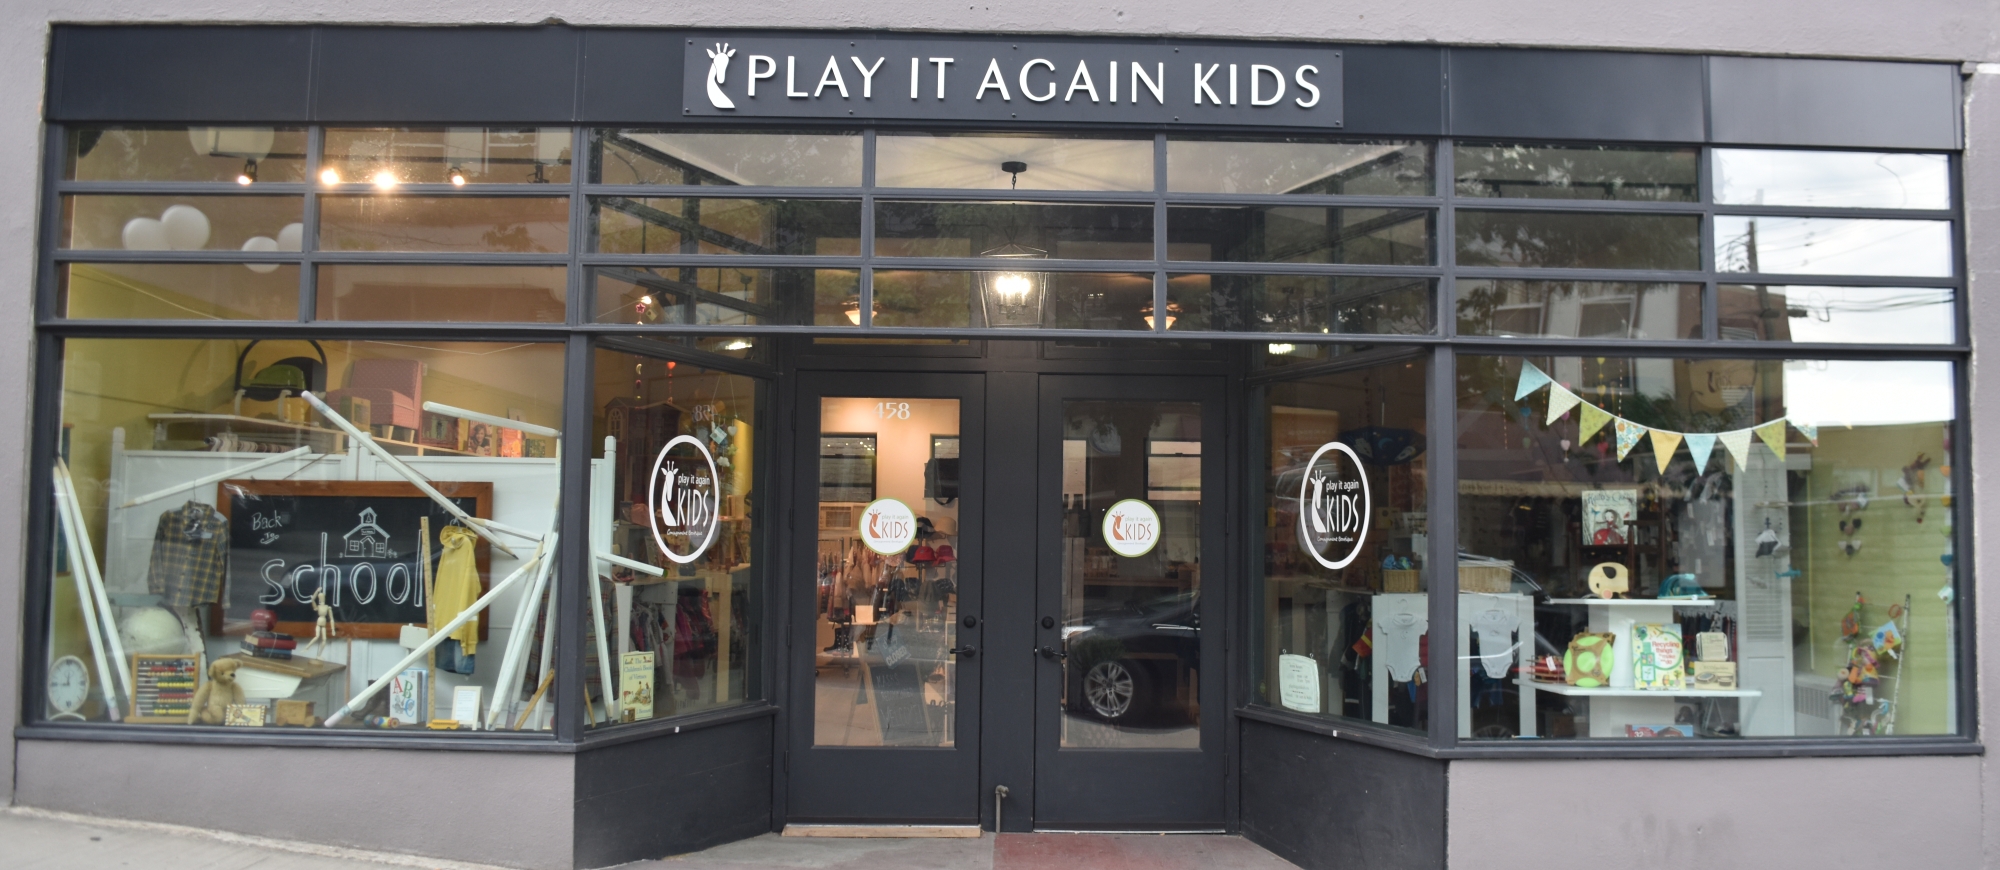 Play It Again Kids storefront